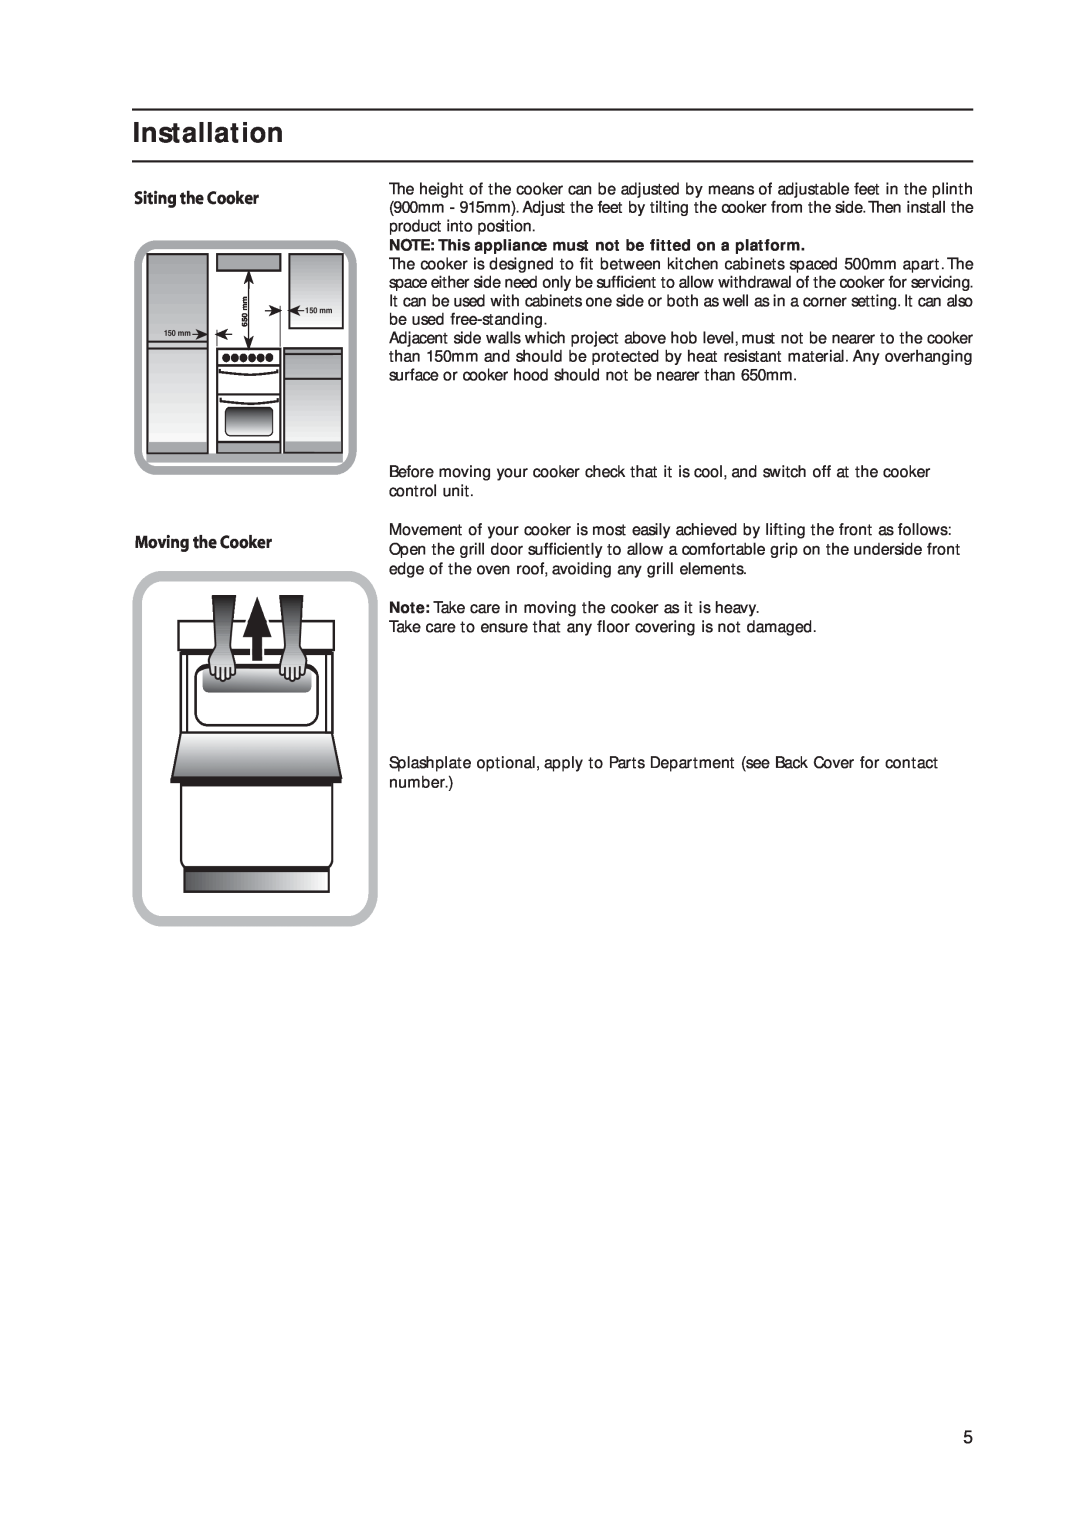 Indesit KD3C11/G, KD3C1/G manual Installation, Siting the Cooker, Moving the Cooker, 150 mm 